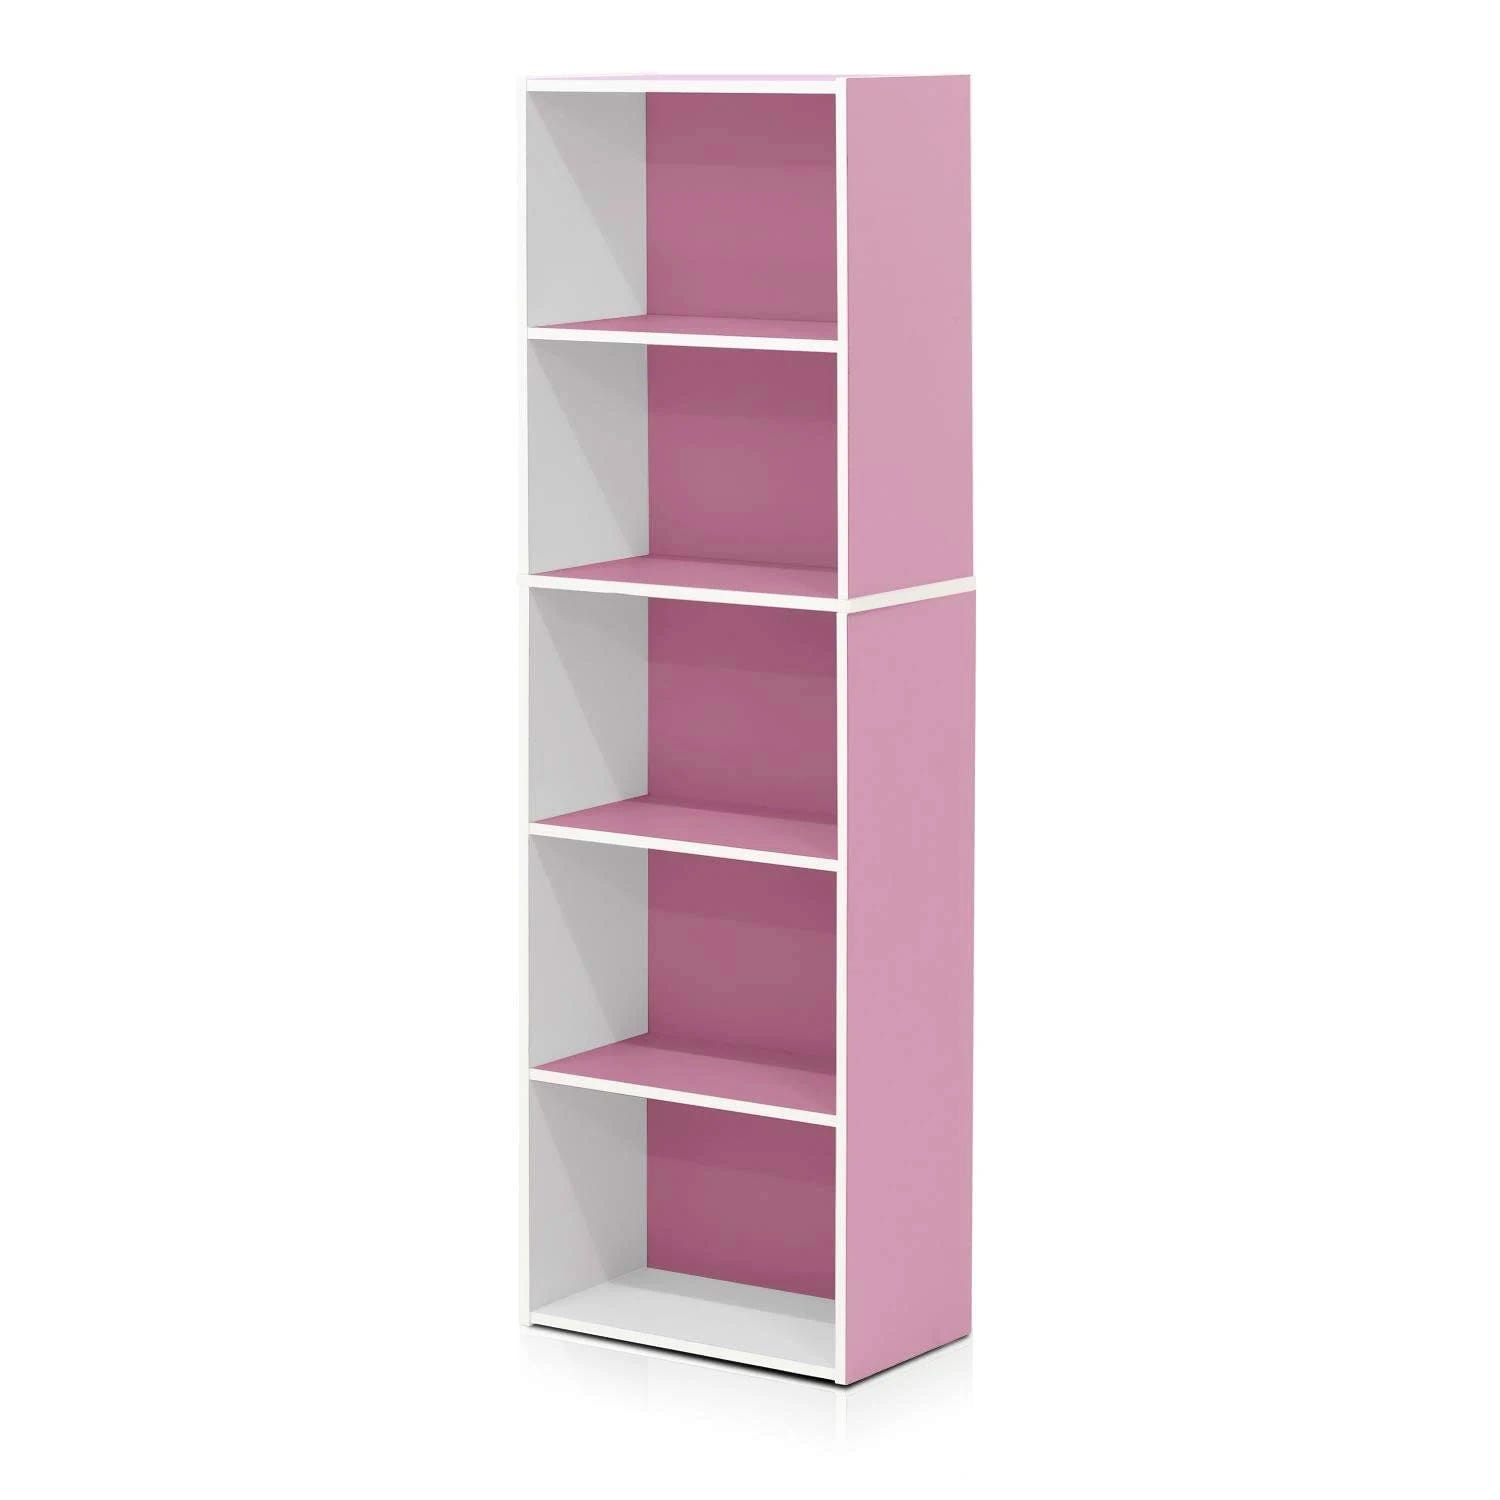 Premium 5-Tier Reversible Color Open Shelf Bookcase with 75lb Weight Capacity | Image